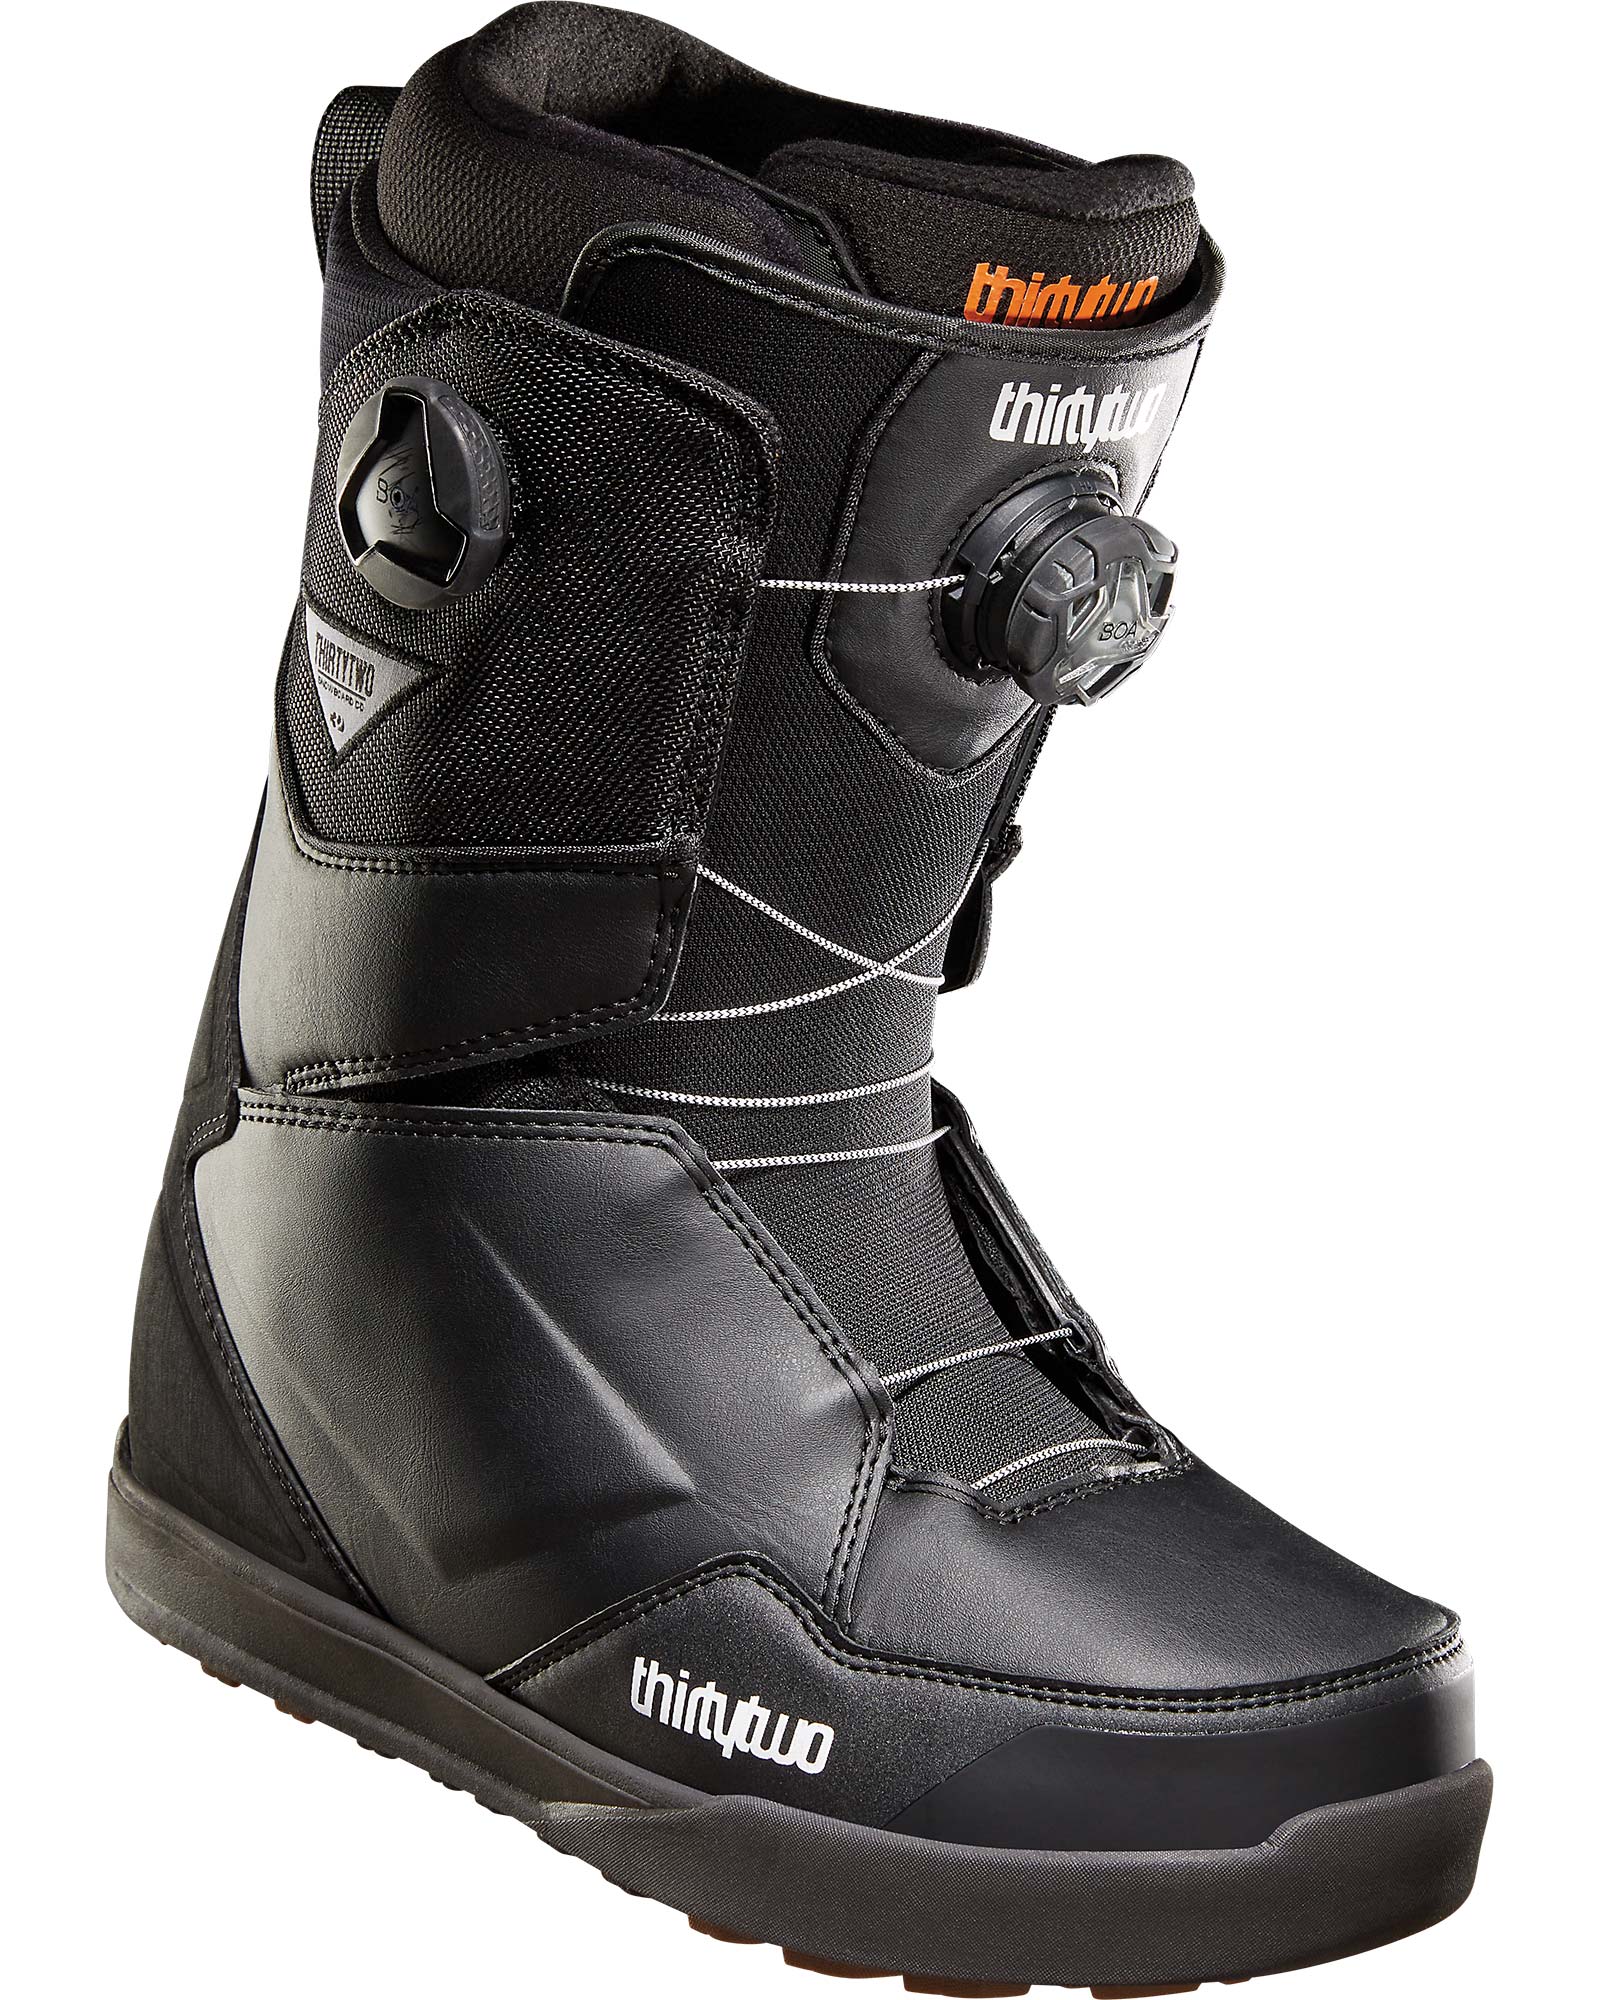 ThirtyTwo Men's Lashed Double BOA Snowboard Boots